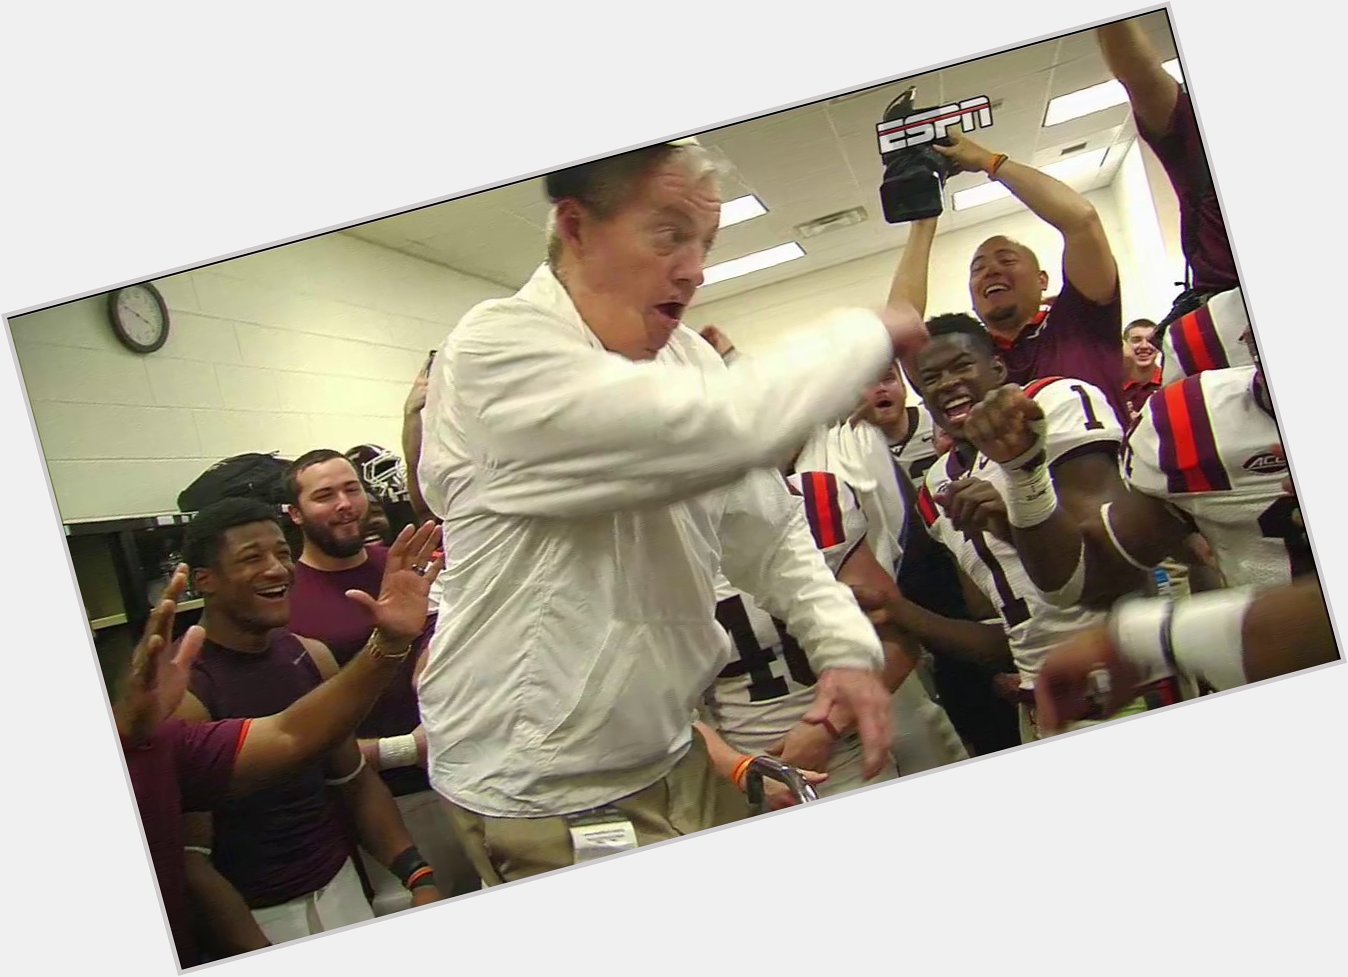 No one dabs better than Frank Beamer!

Happy birthday to the legend 